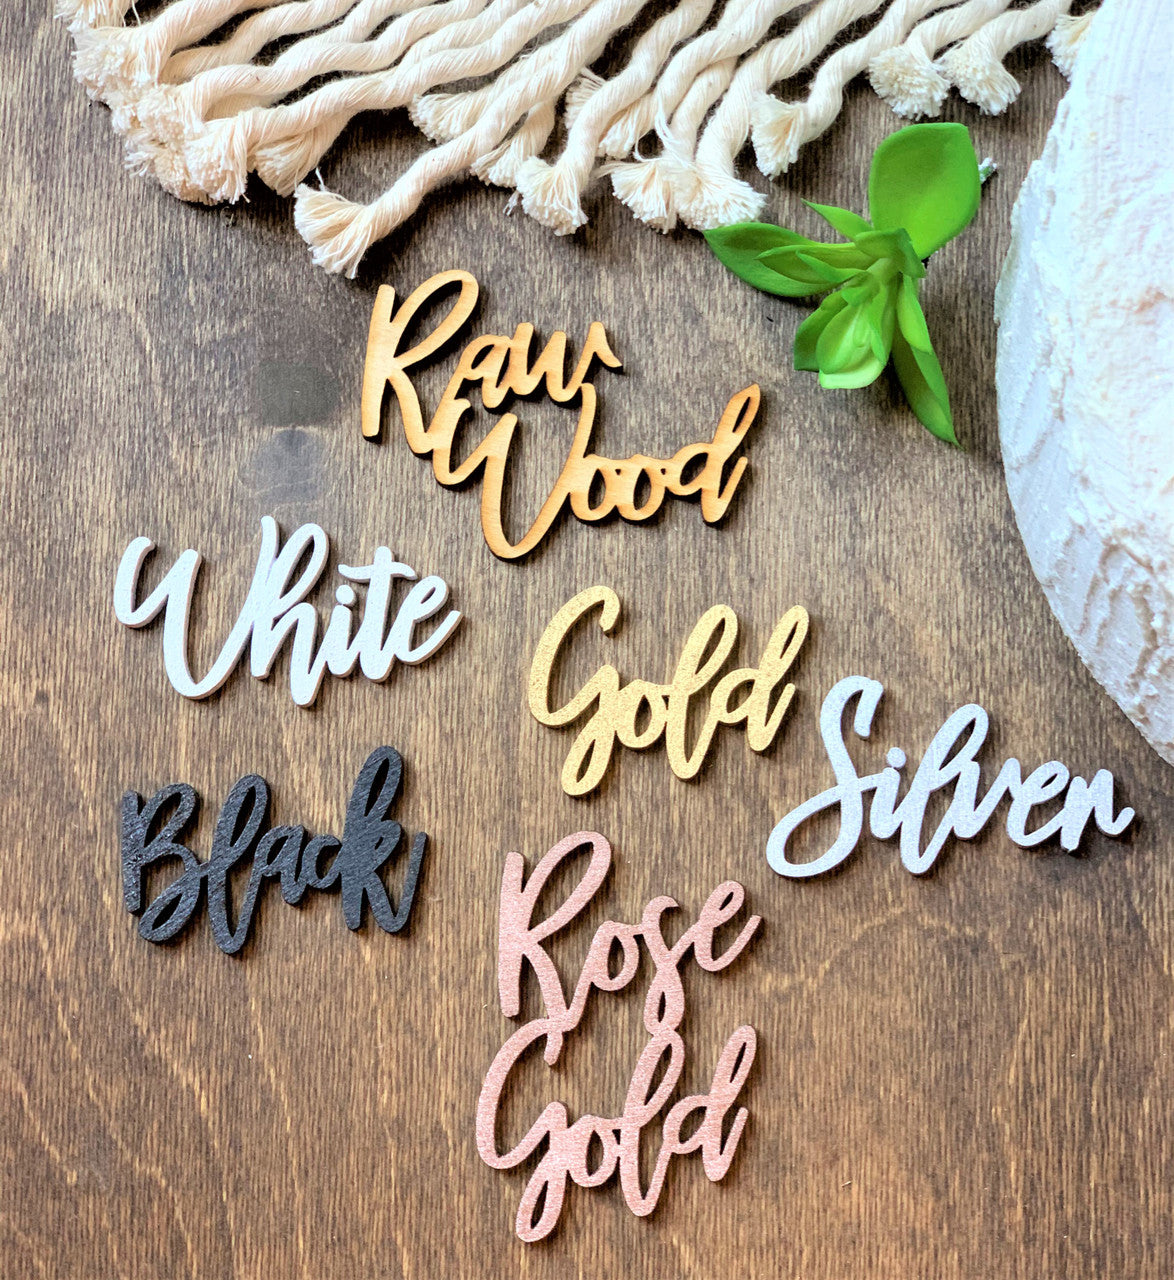 PERSONALIZED Anchor Cake Topper with Name or Last Name